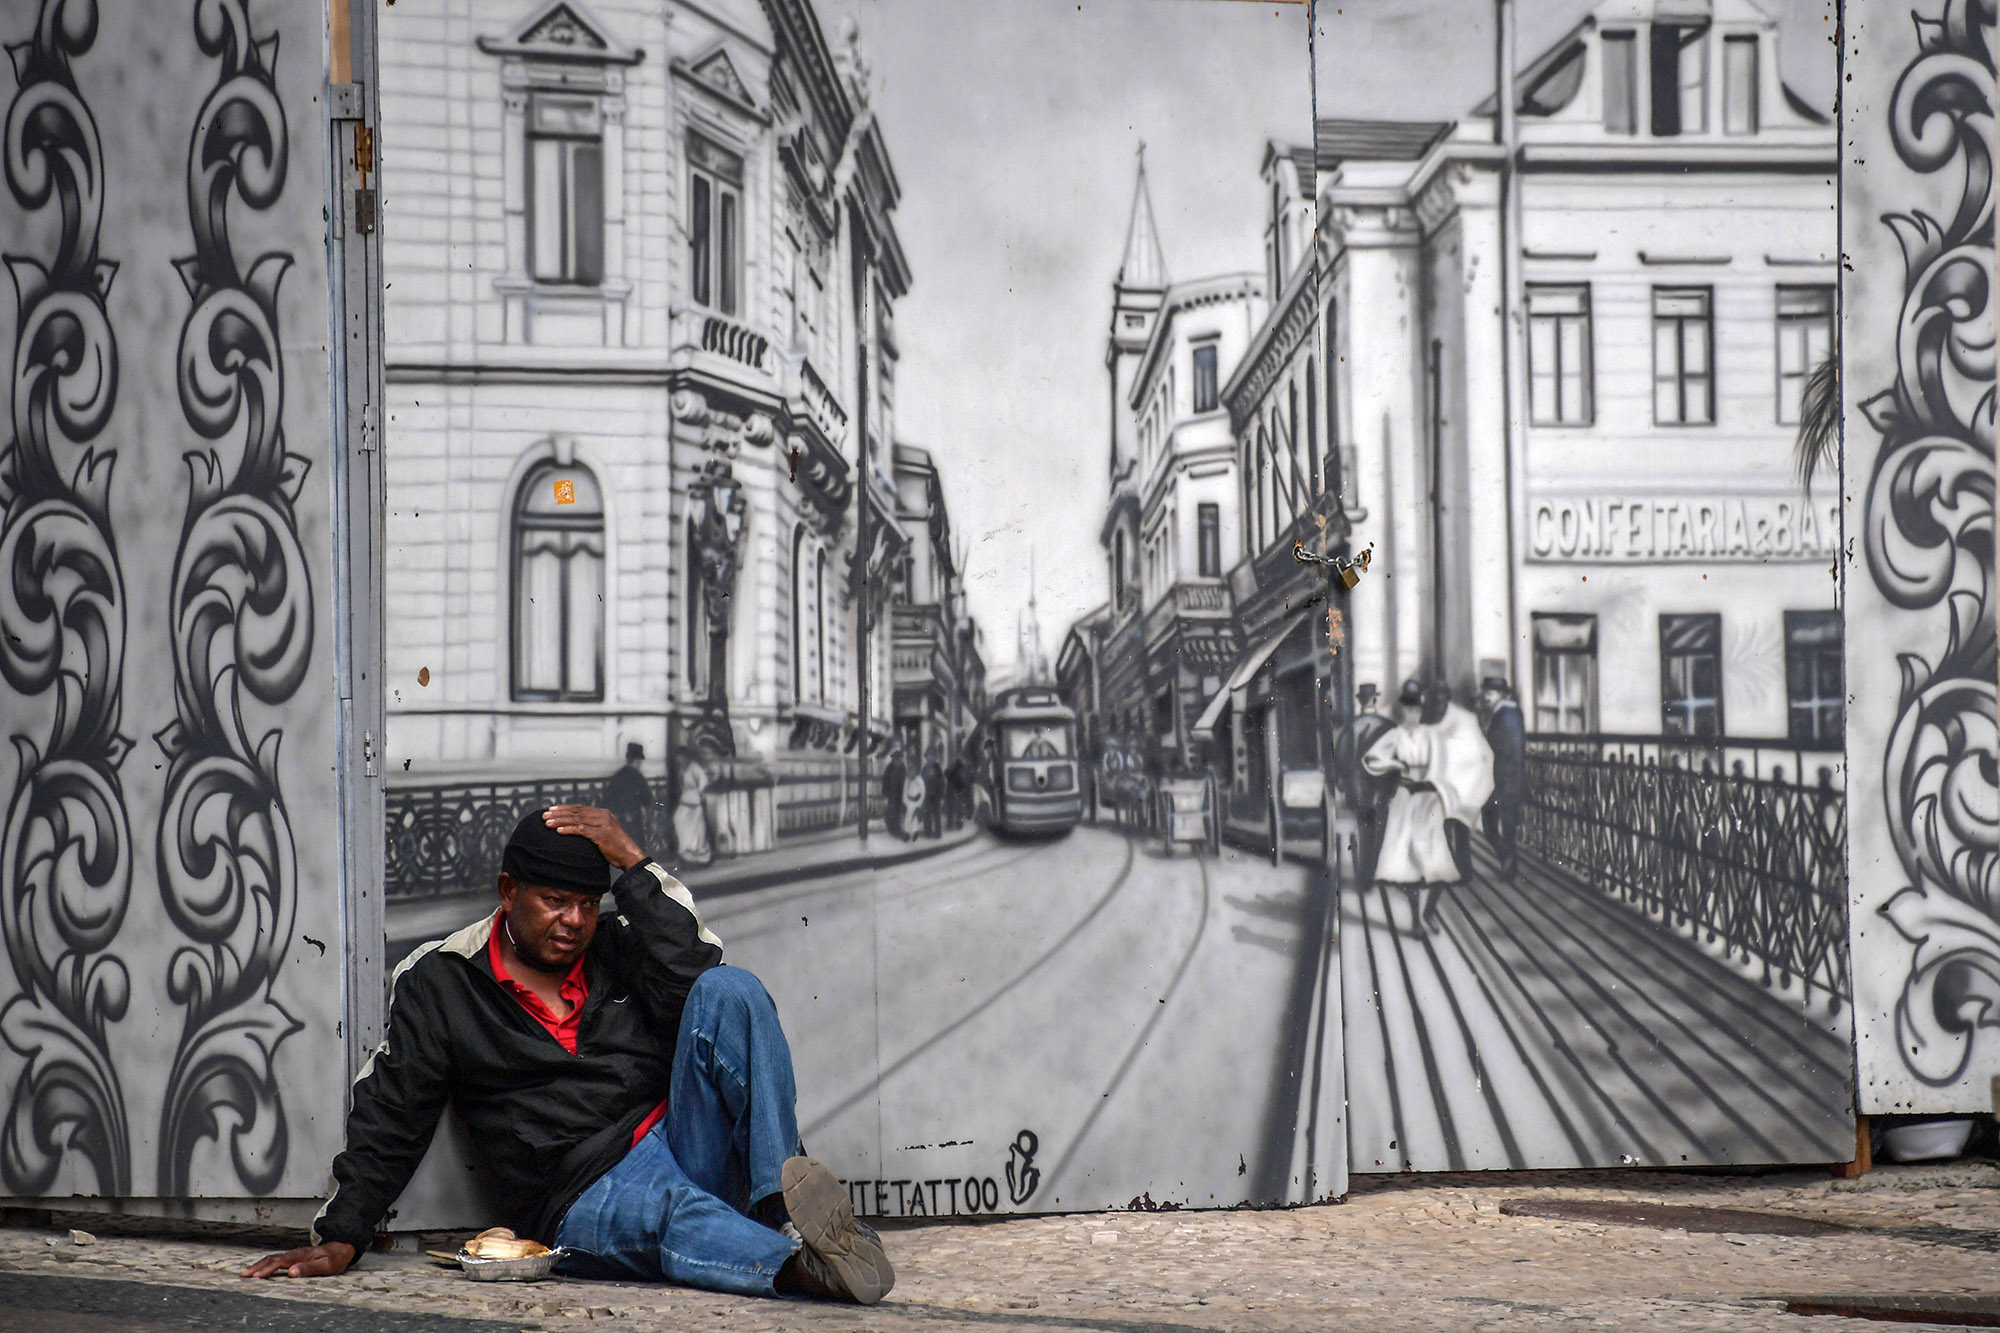 A man begs in front of a mural depicting old Sao Paulo, in Sao Paulo, Brazil, on July 6.